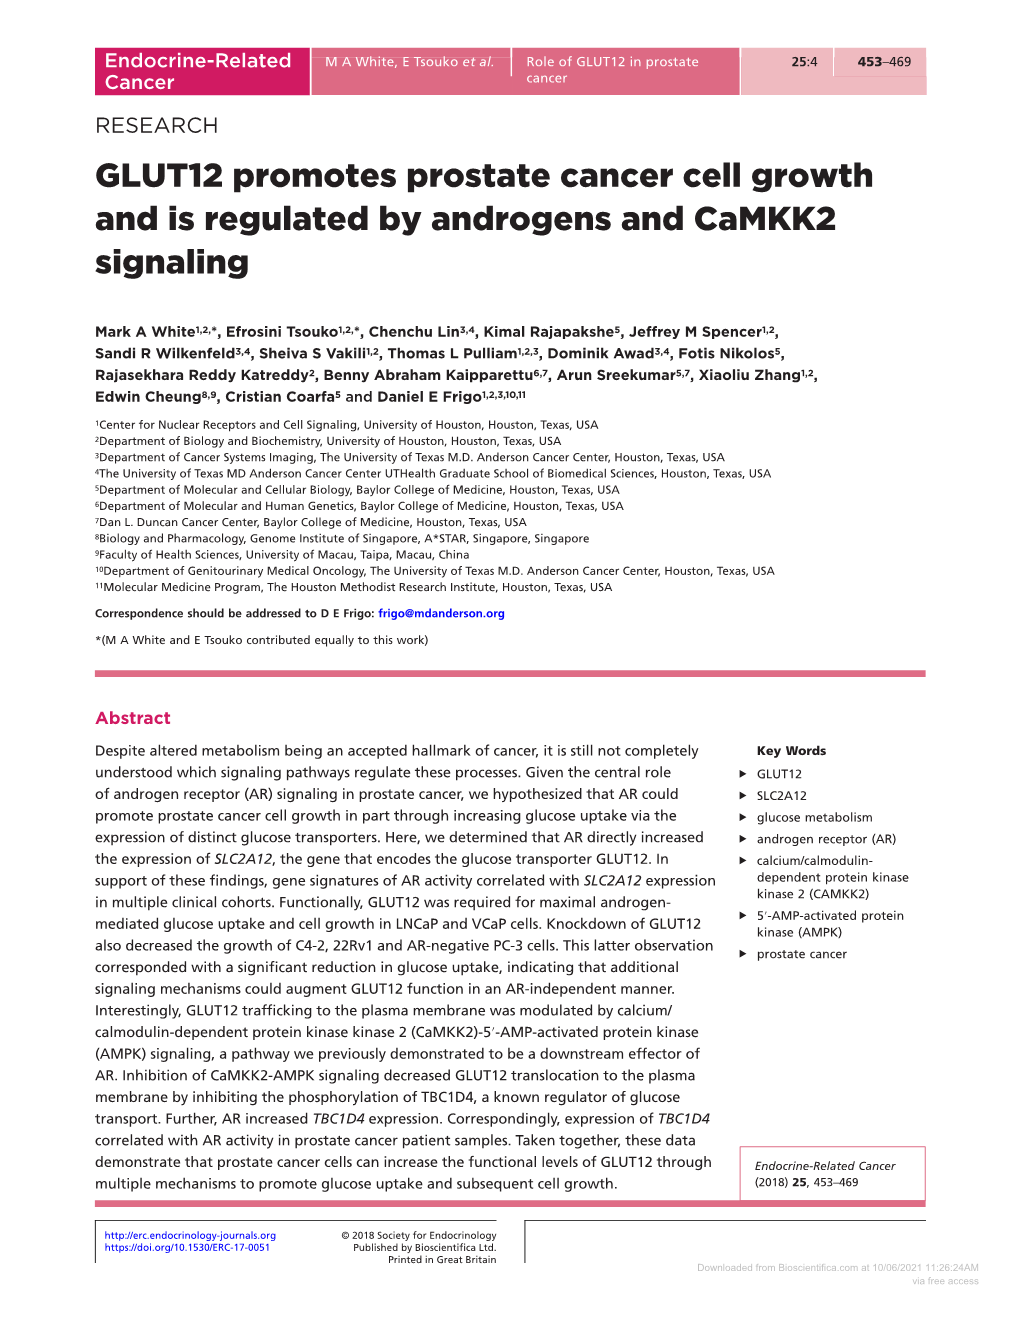 GLUT12 Promotes Prostate Cancer Cell Growth and Is Regulated by Androgens and Camkk2 Signaling